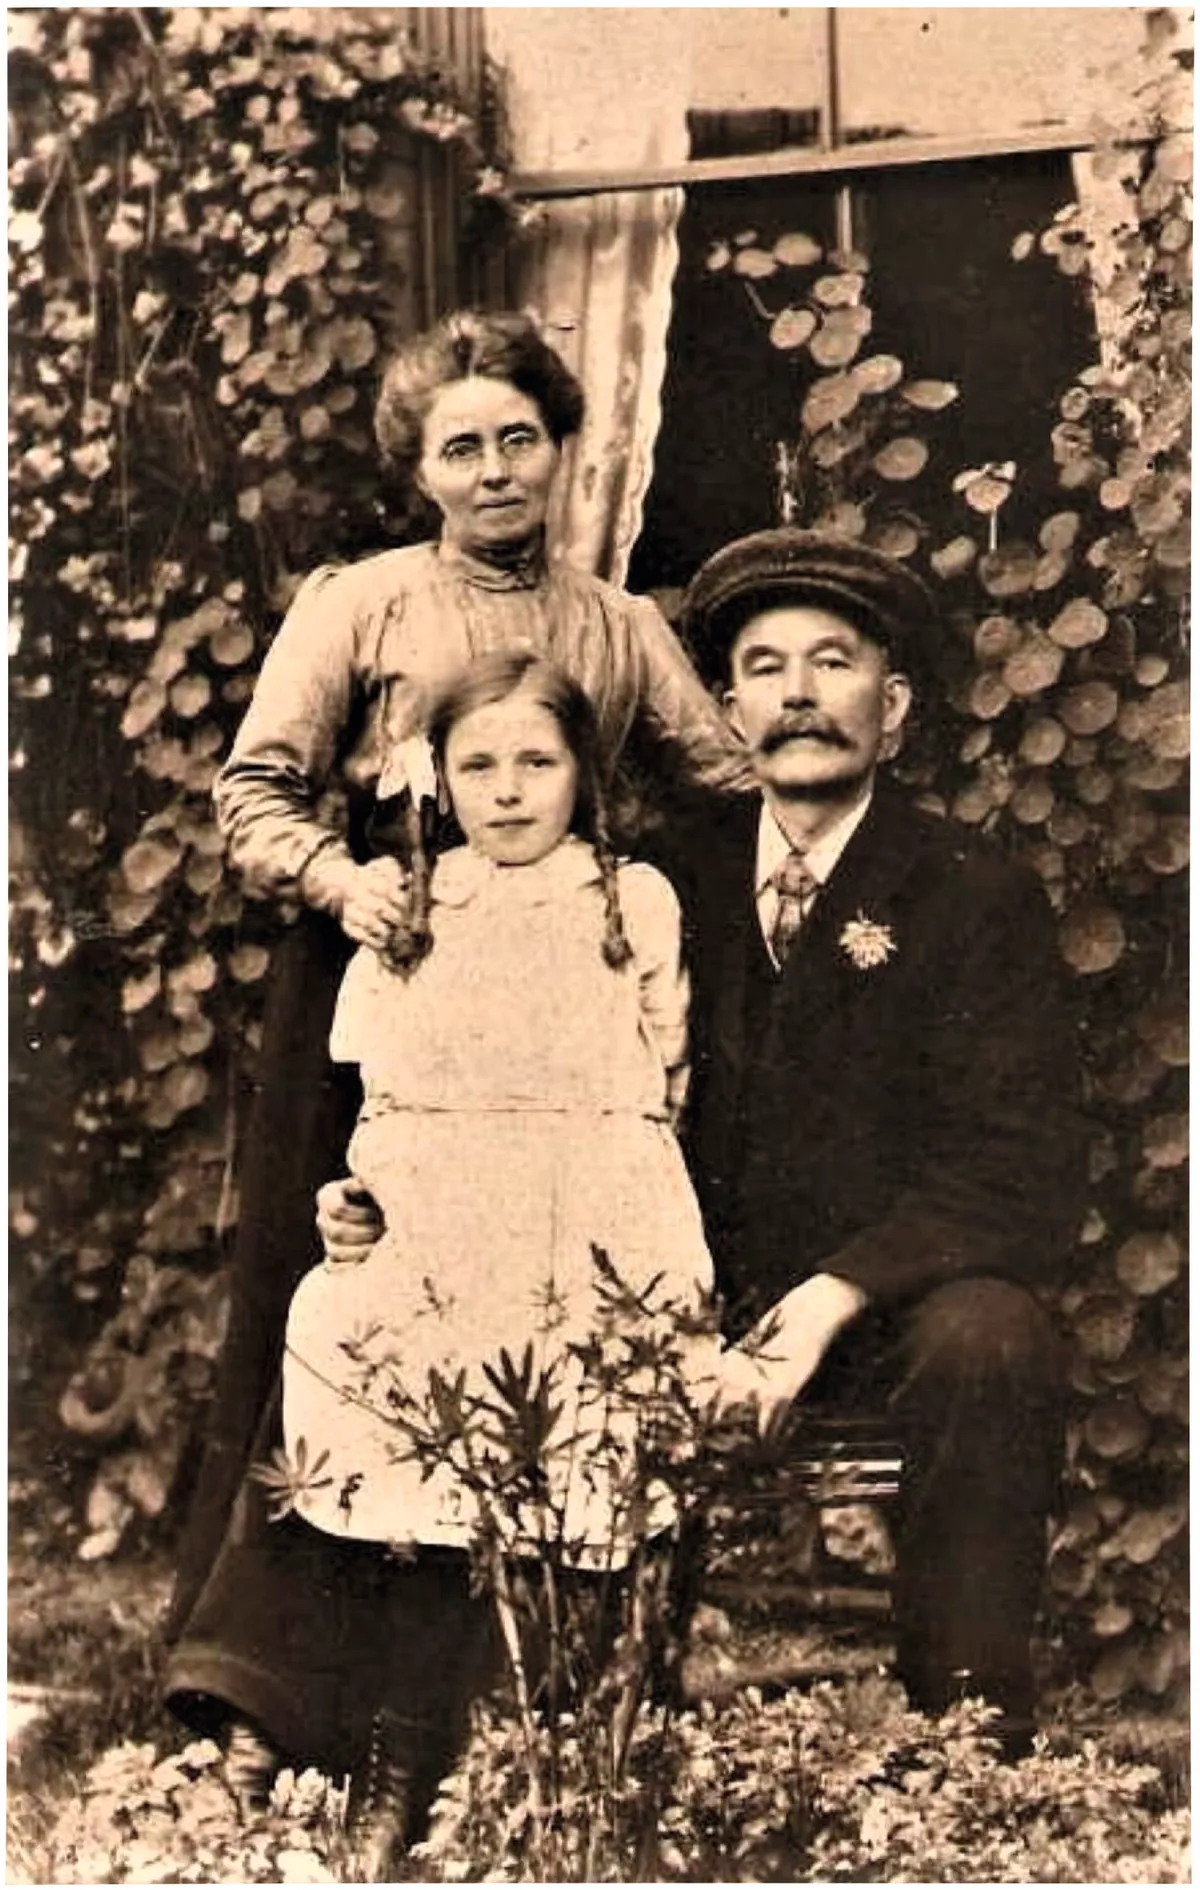 Black and white photograph of a man, a woman and a little girl in Victorian dress